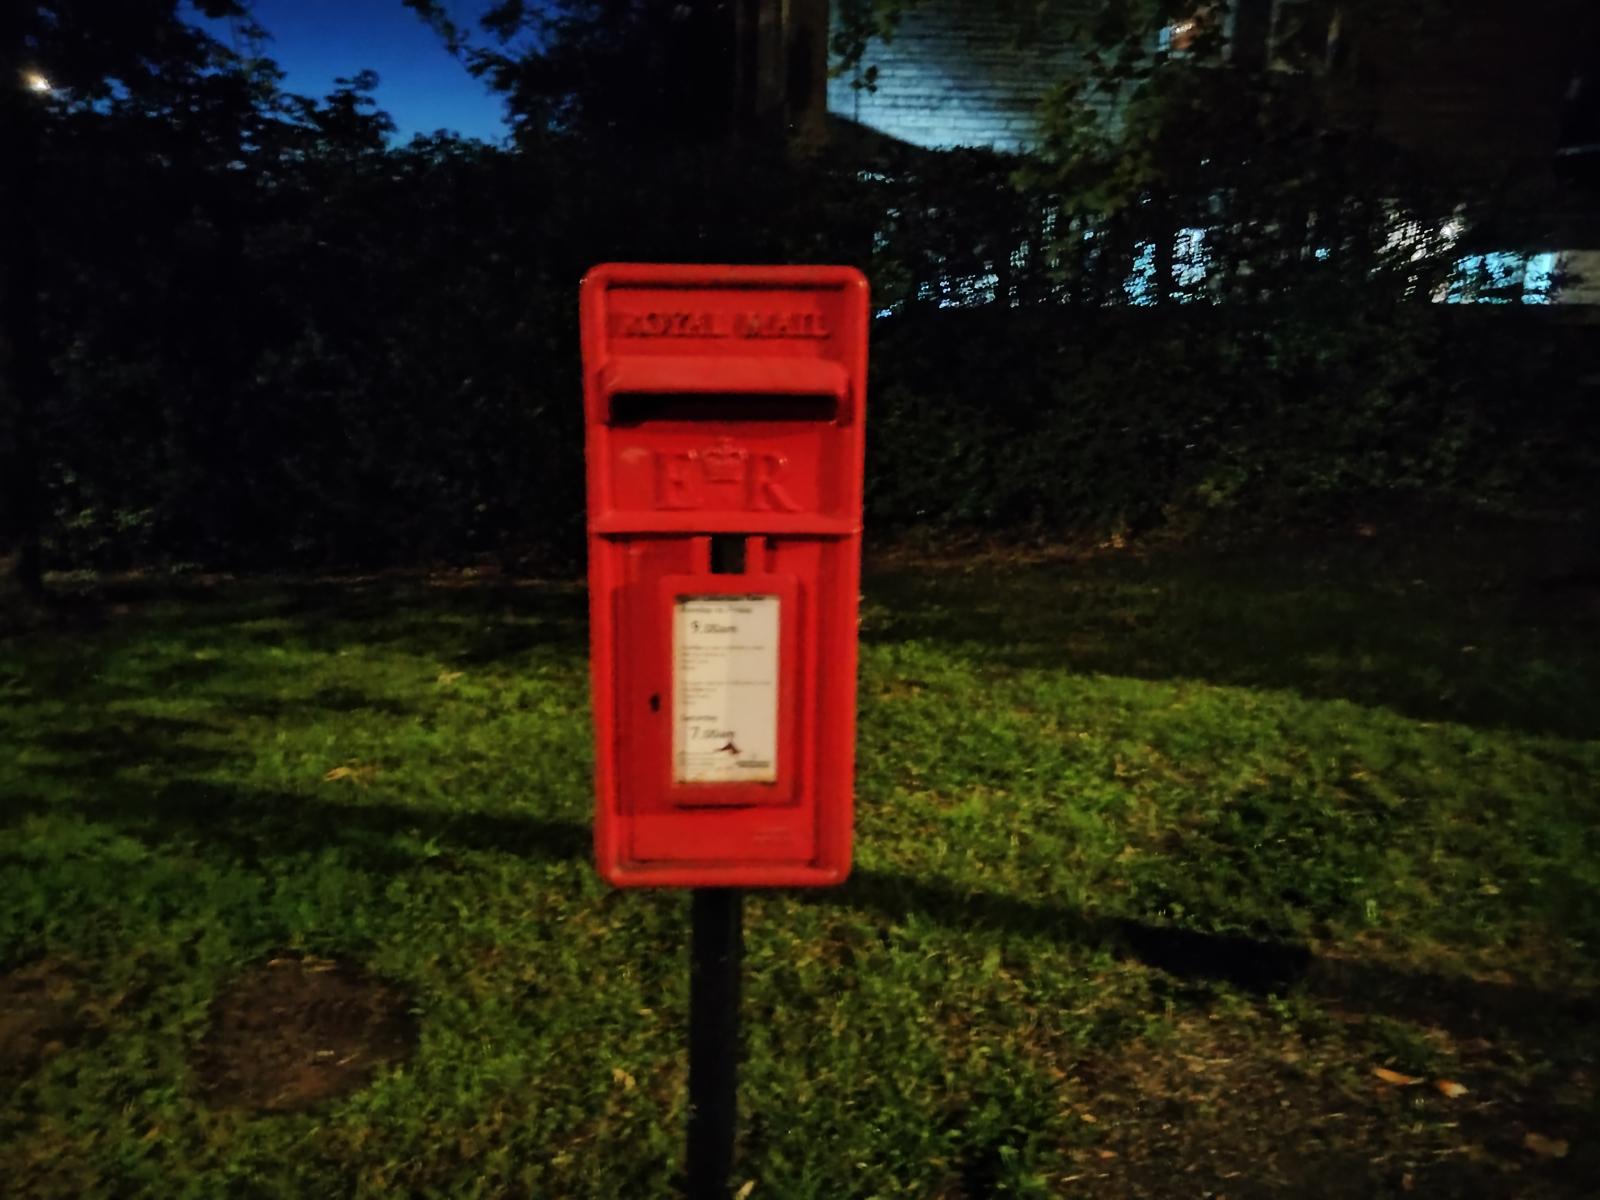 Sony Xperia 10 IV camera sample showing a post box in the dark with night mode on